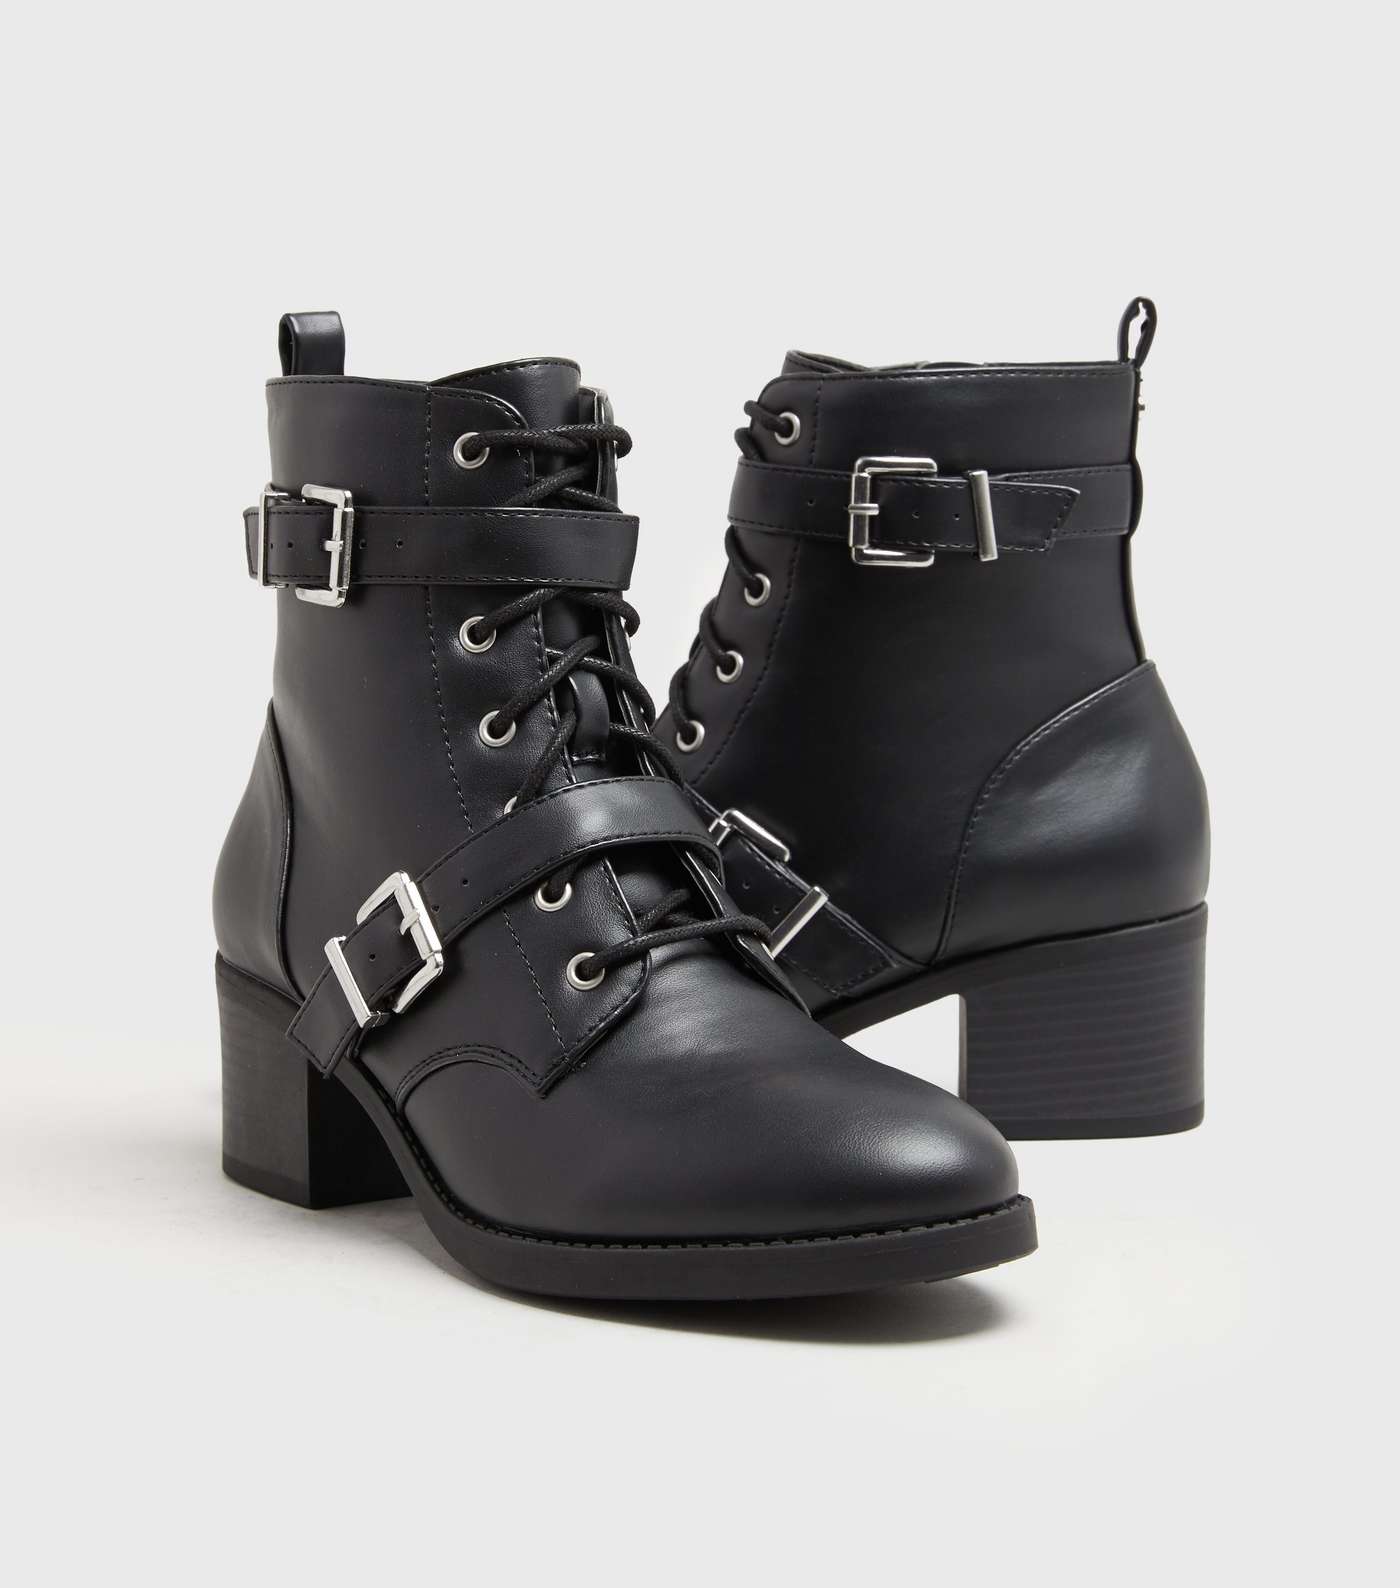 Black Buckle Lace Up Mid Heel Ankle Boots Image 3